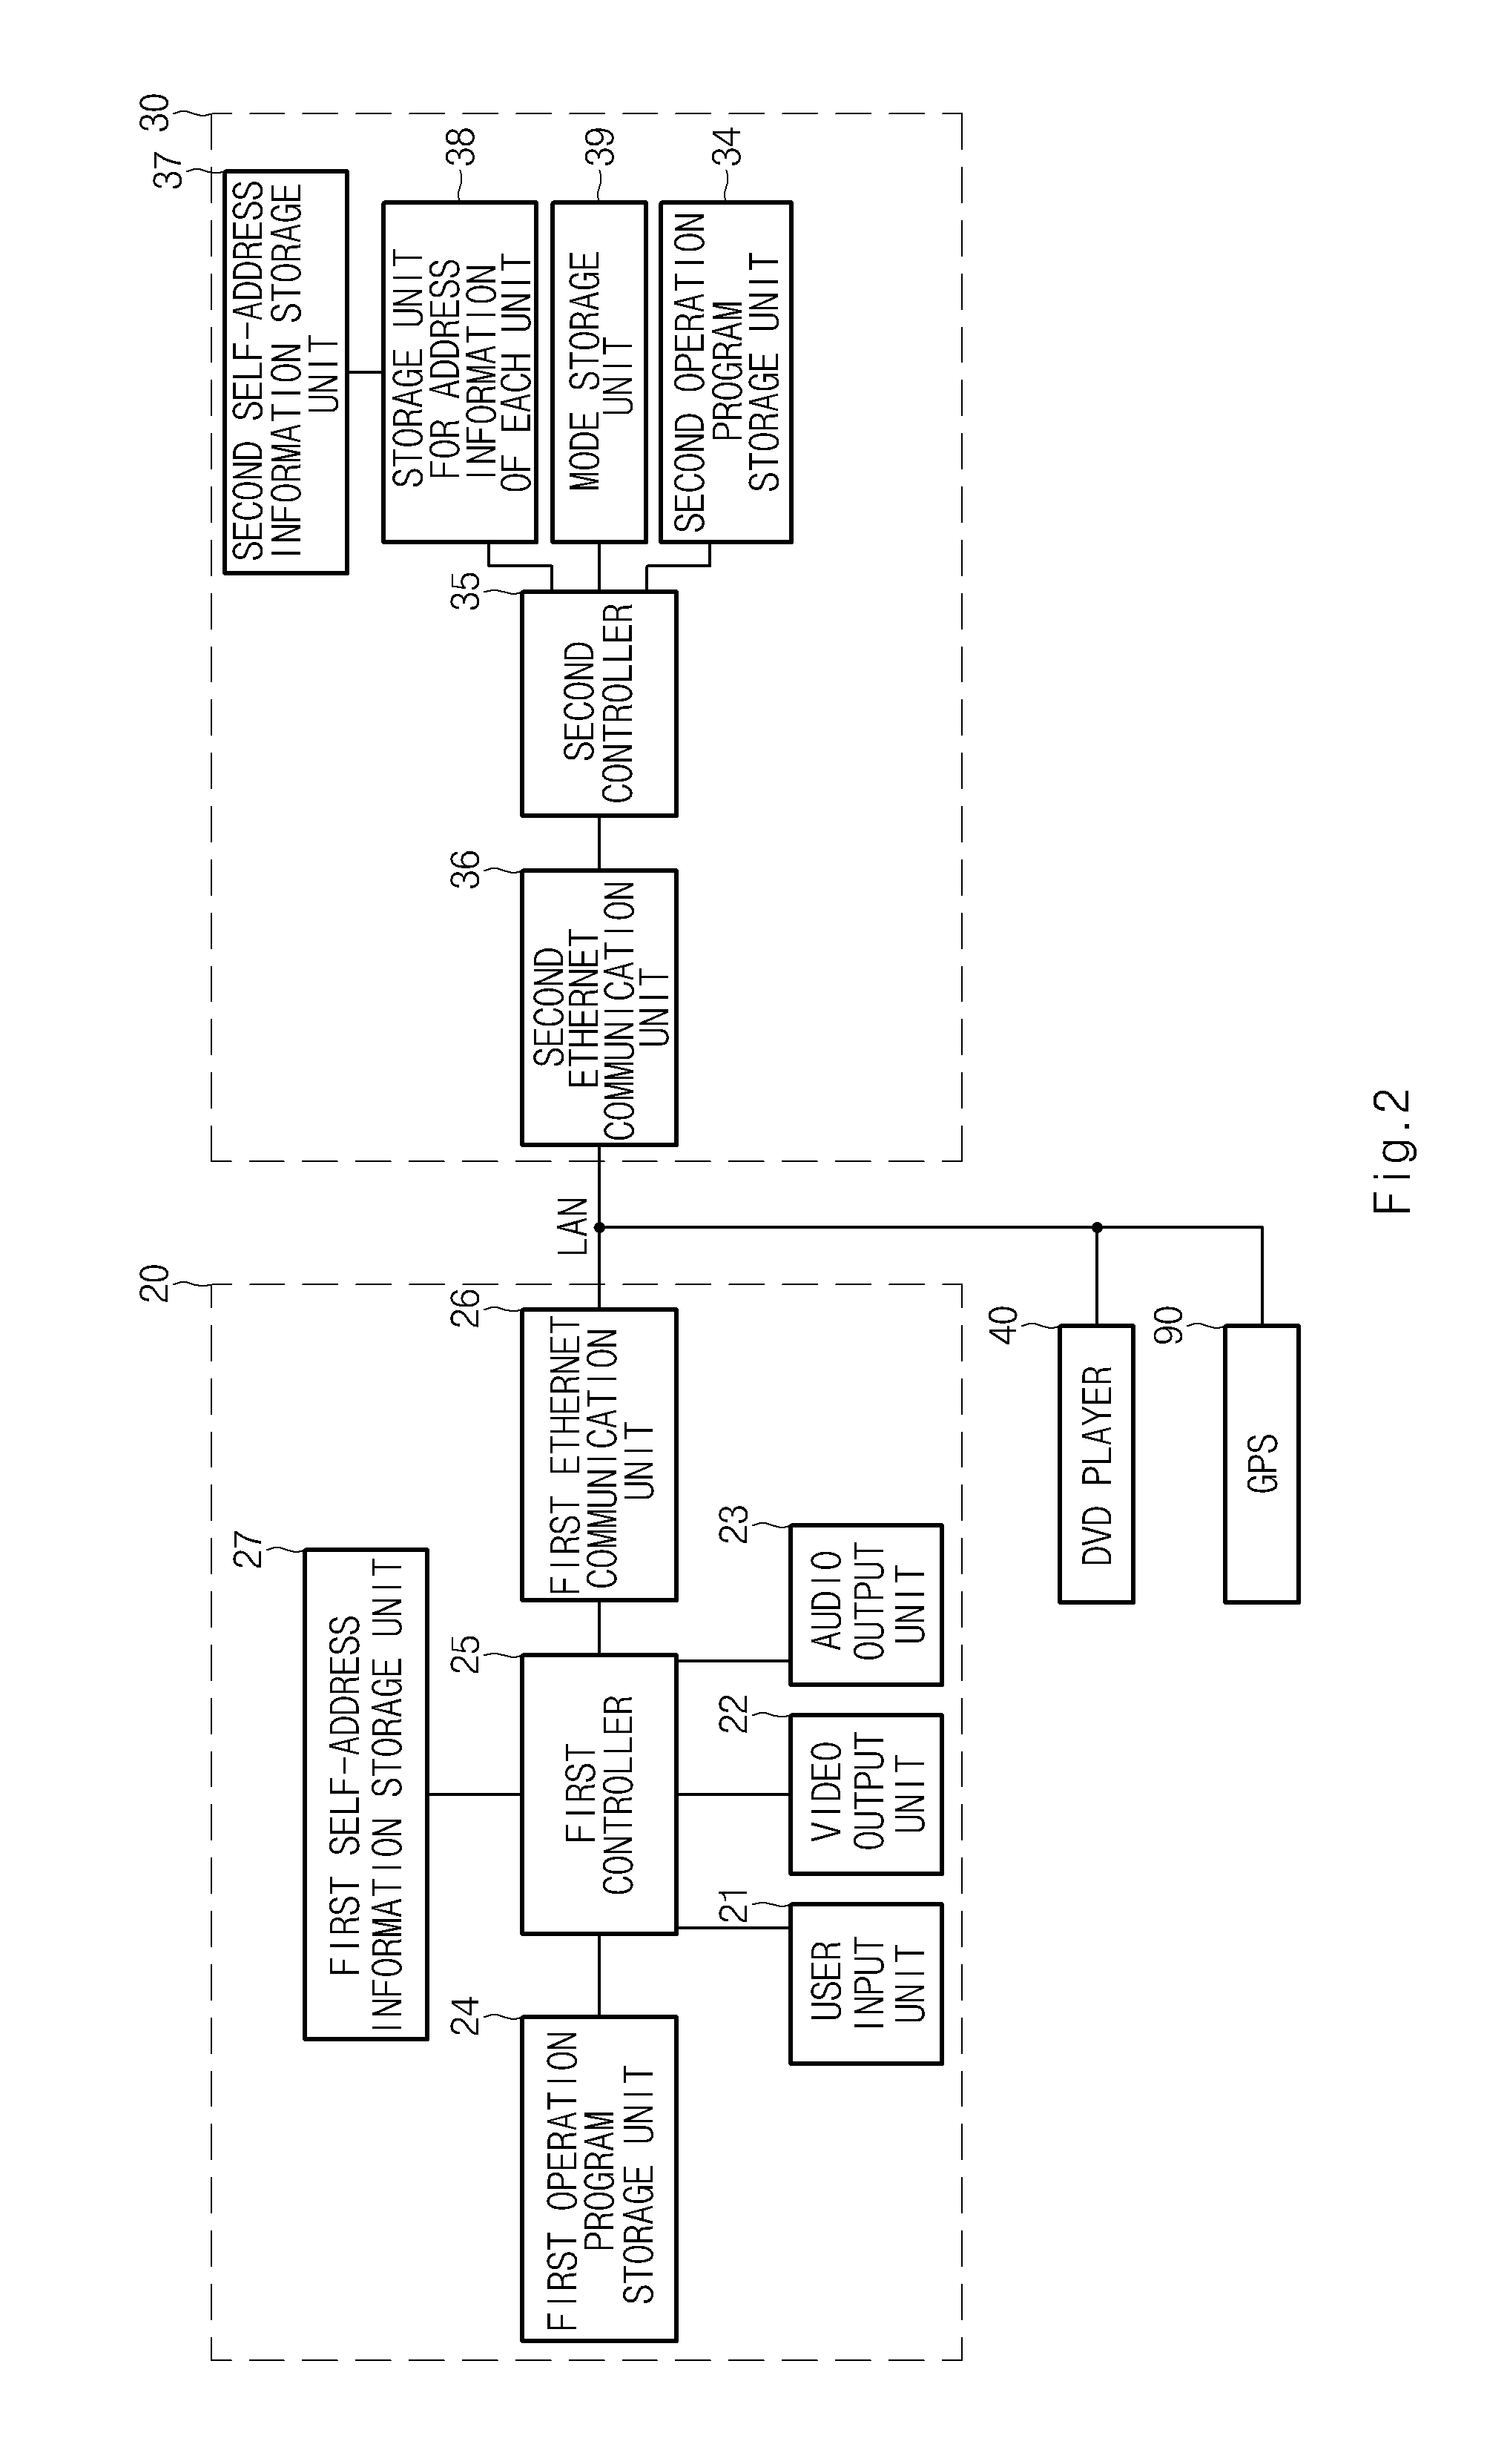 System and method for managing ethernet communication network for use in vehicle